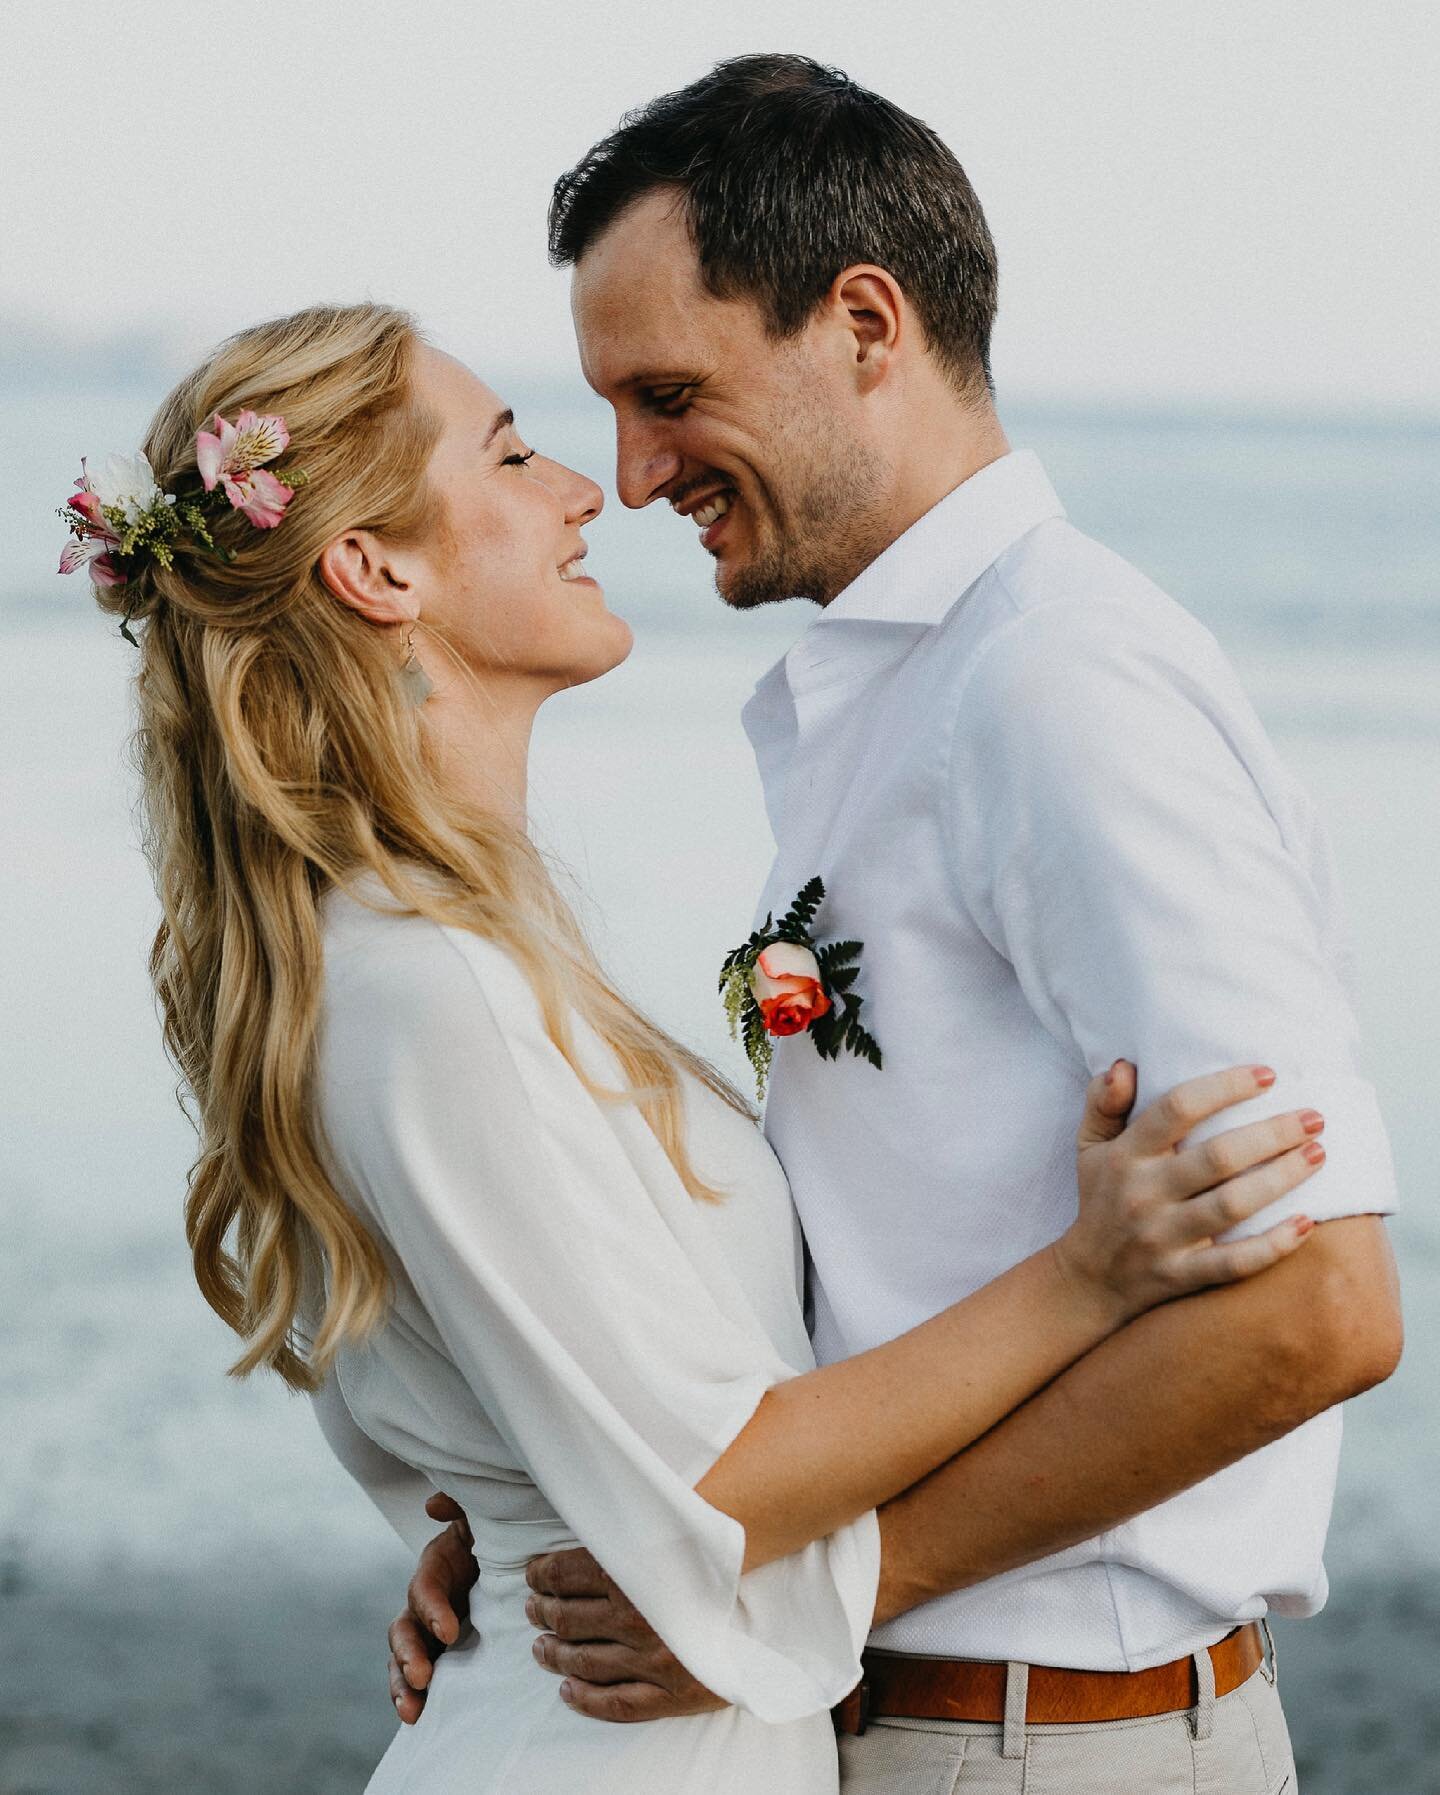 Are you thinking about eloping? 
Well we have in our blog an entry about Why Costa Rica should be on your Destination Wedding list!
You can find the link in bio
&mdash;
Photo for this incredible Austrian couple that visit our country for elope at @ho